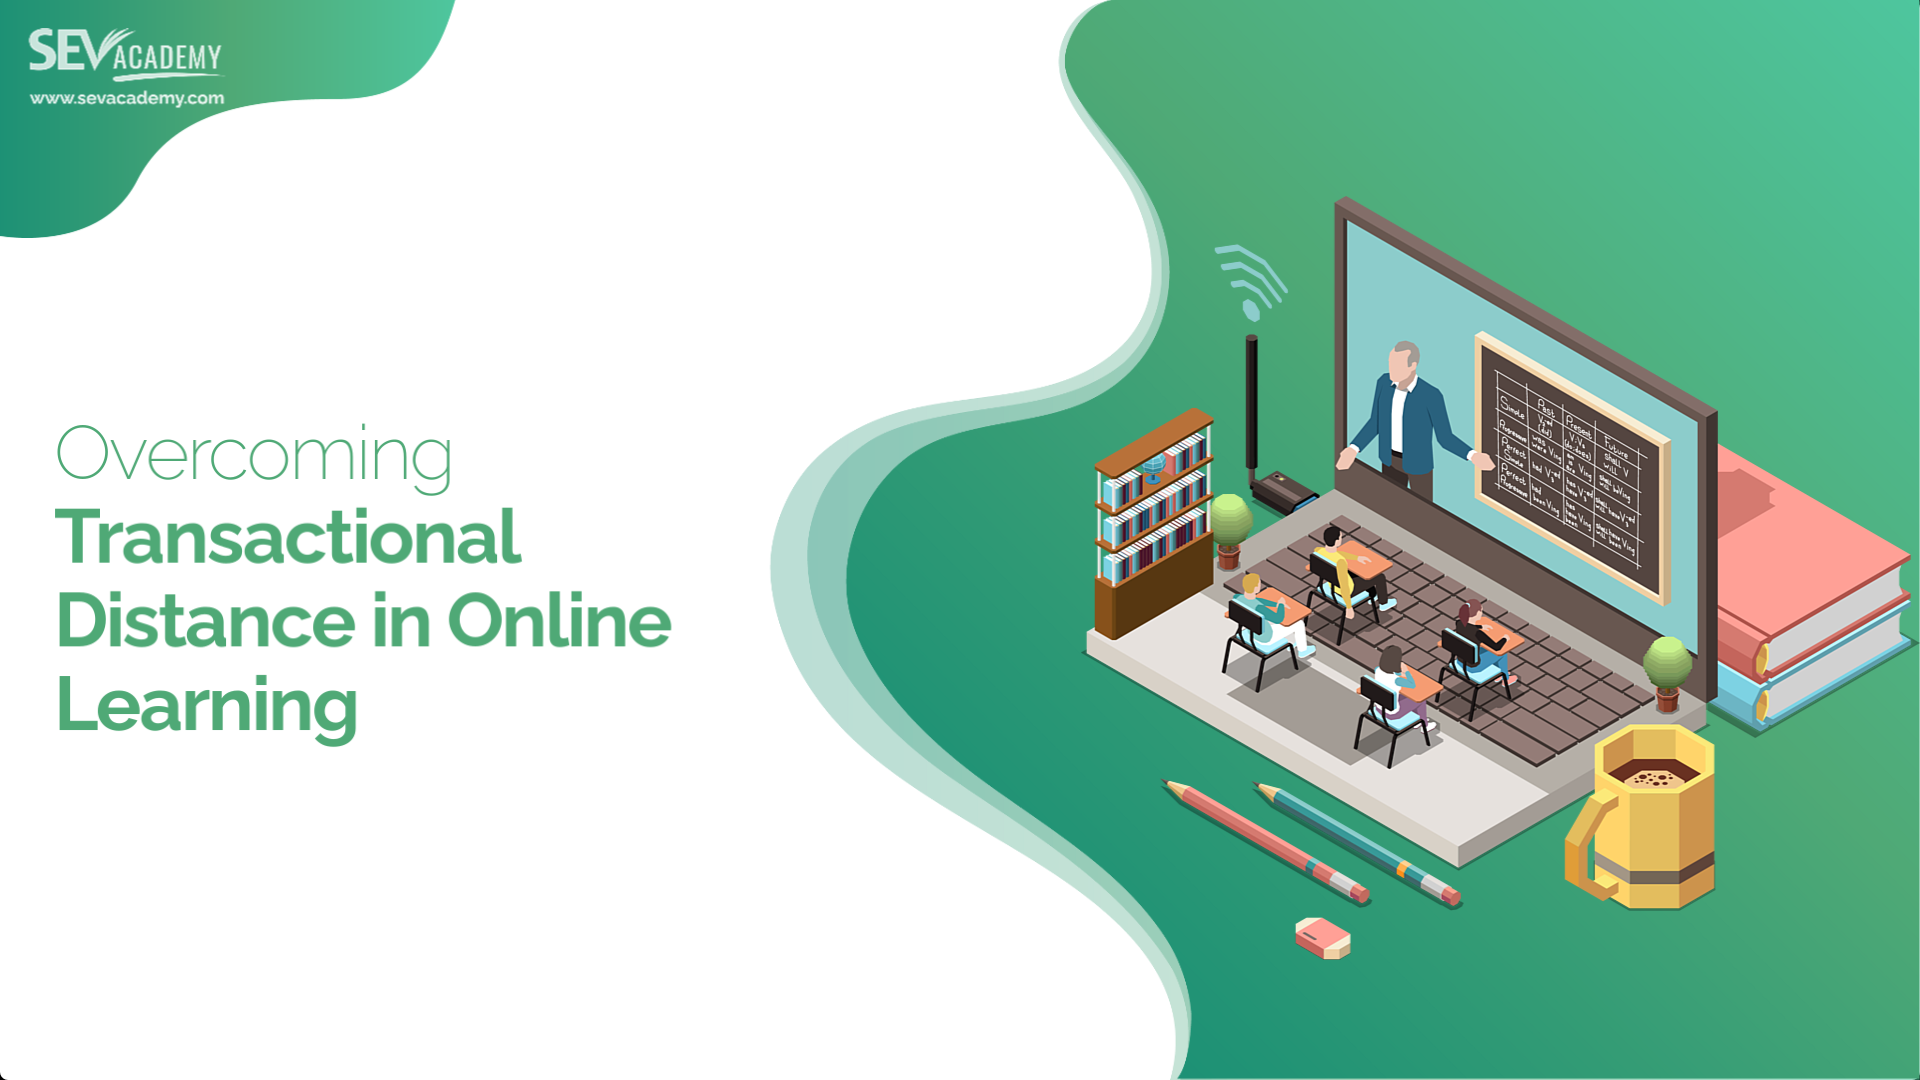 Overcoming Transactional Distance in Online Learning